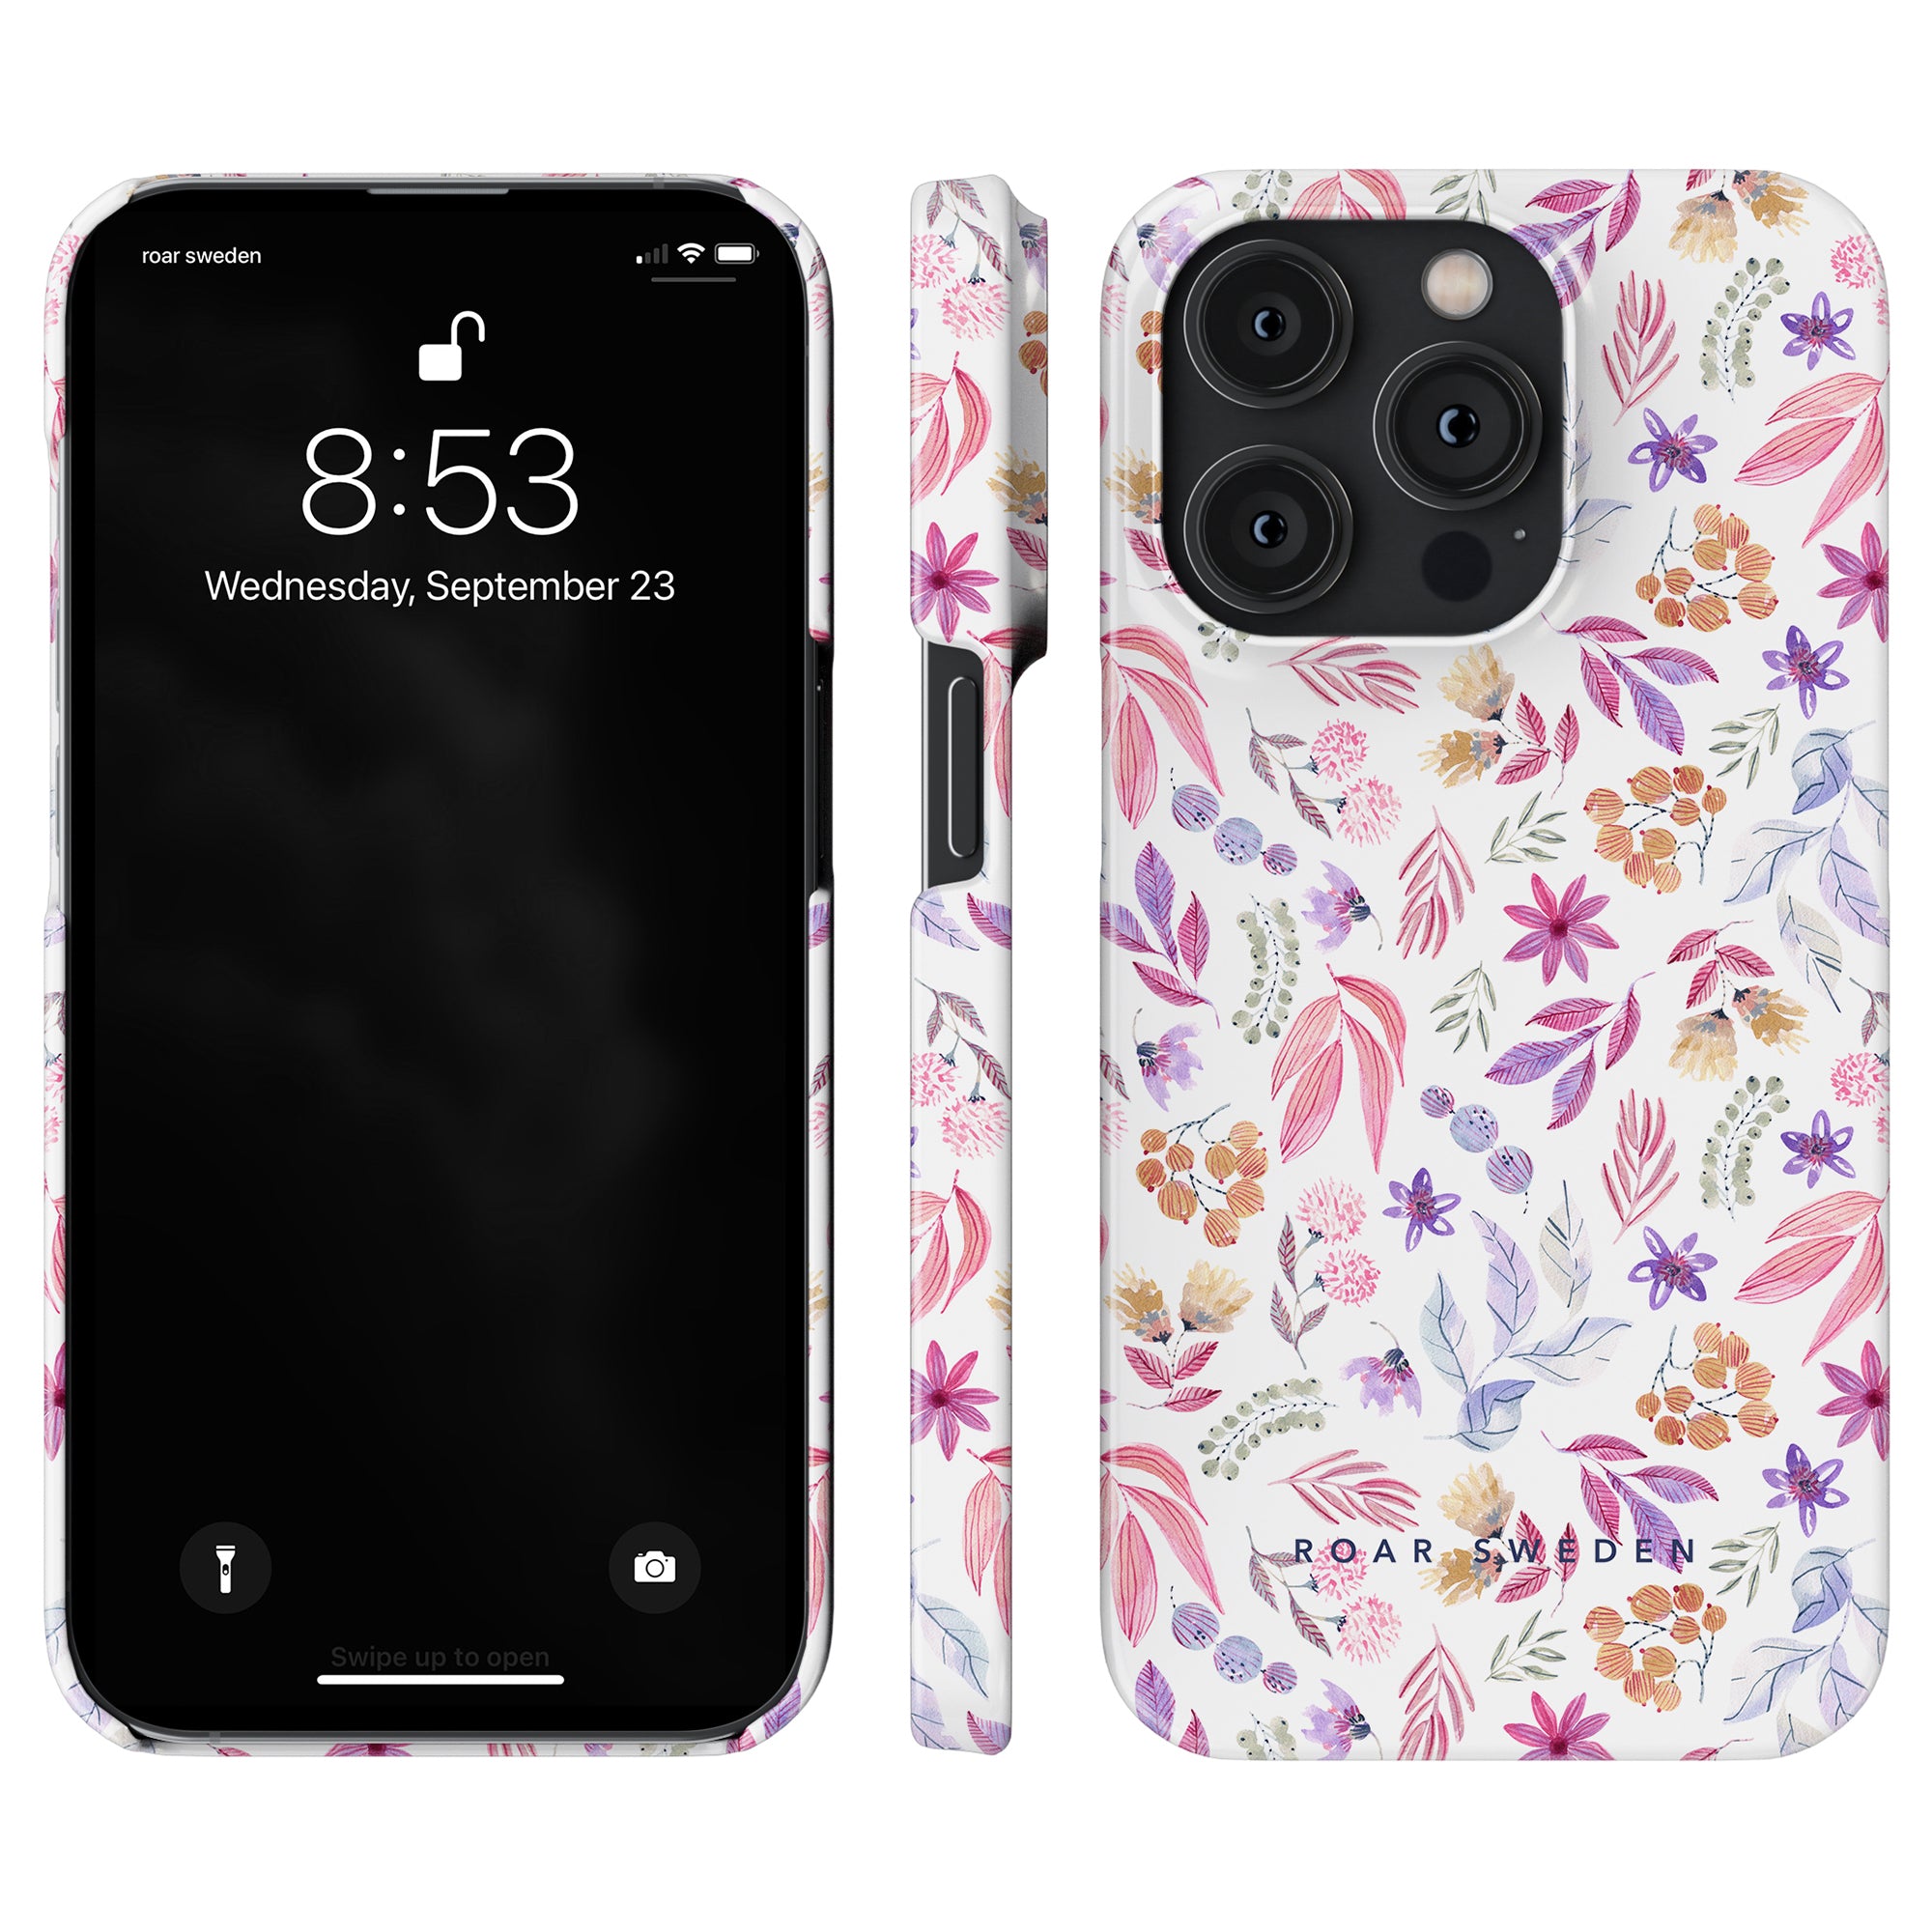 A smartphone with a Flower Power - Slim case is shown from the front, side, and back. The lock screen displays the time as 8:53 and the date as Wednesday, September 23.